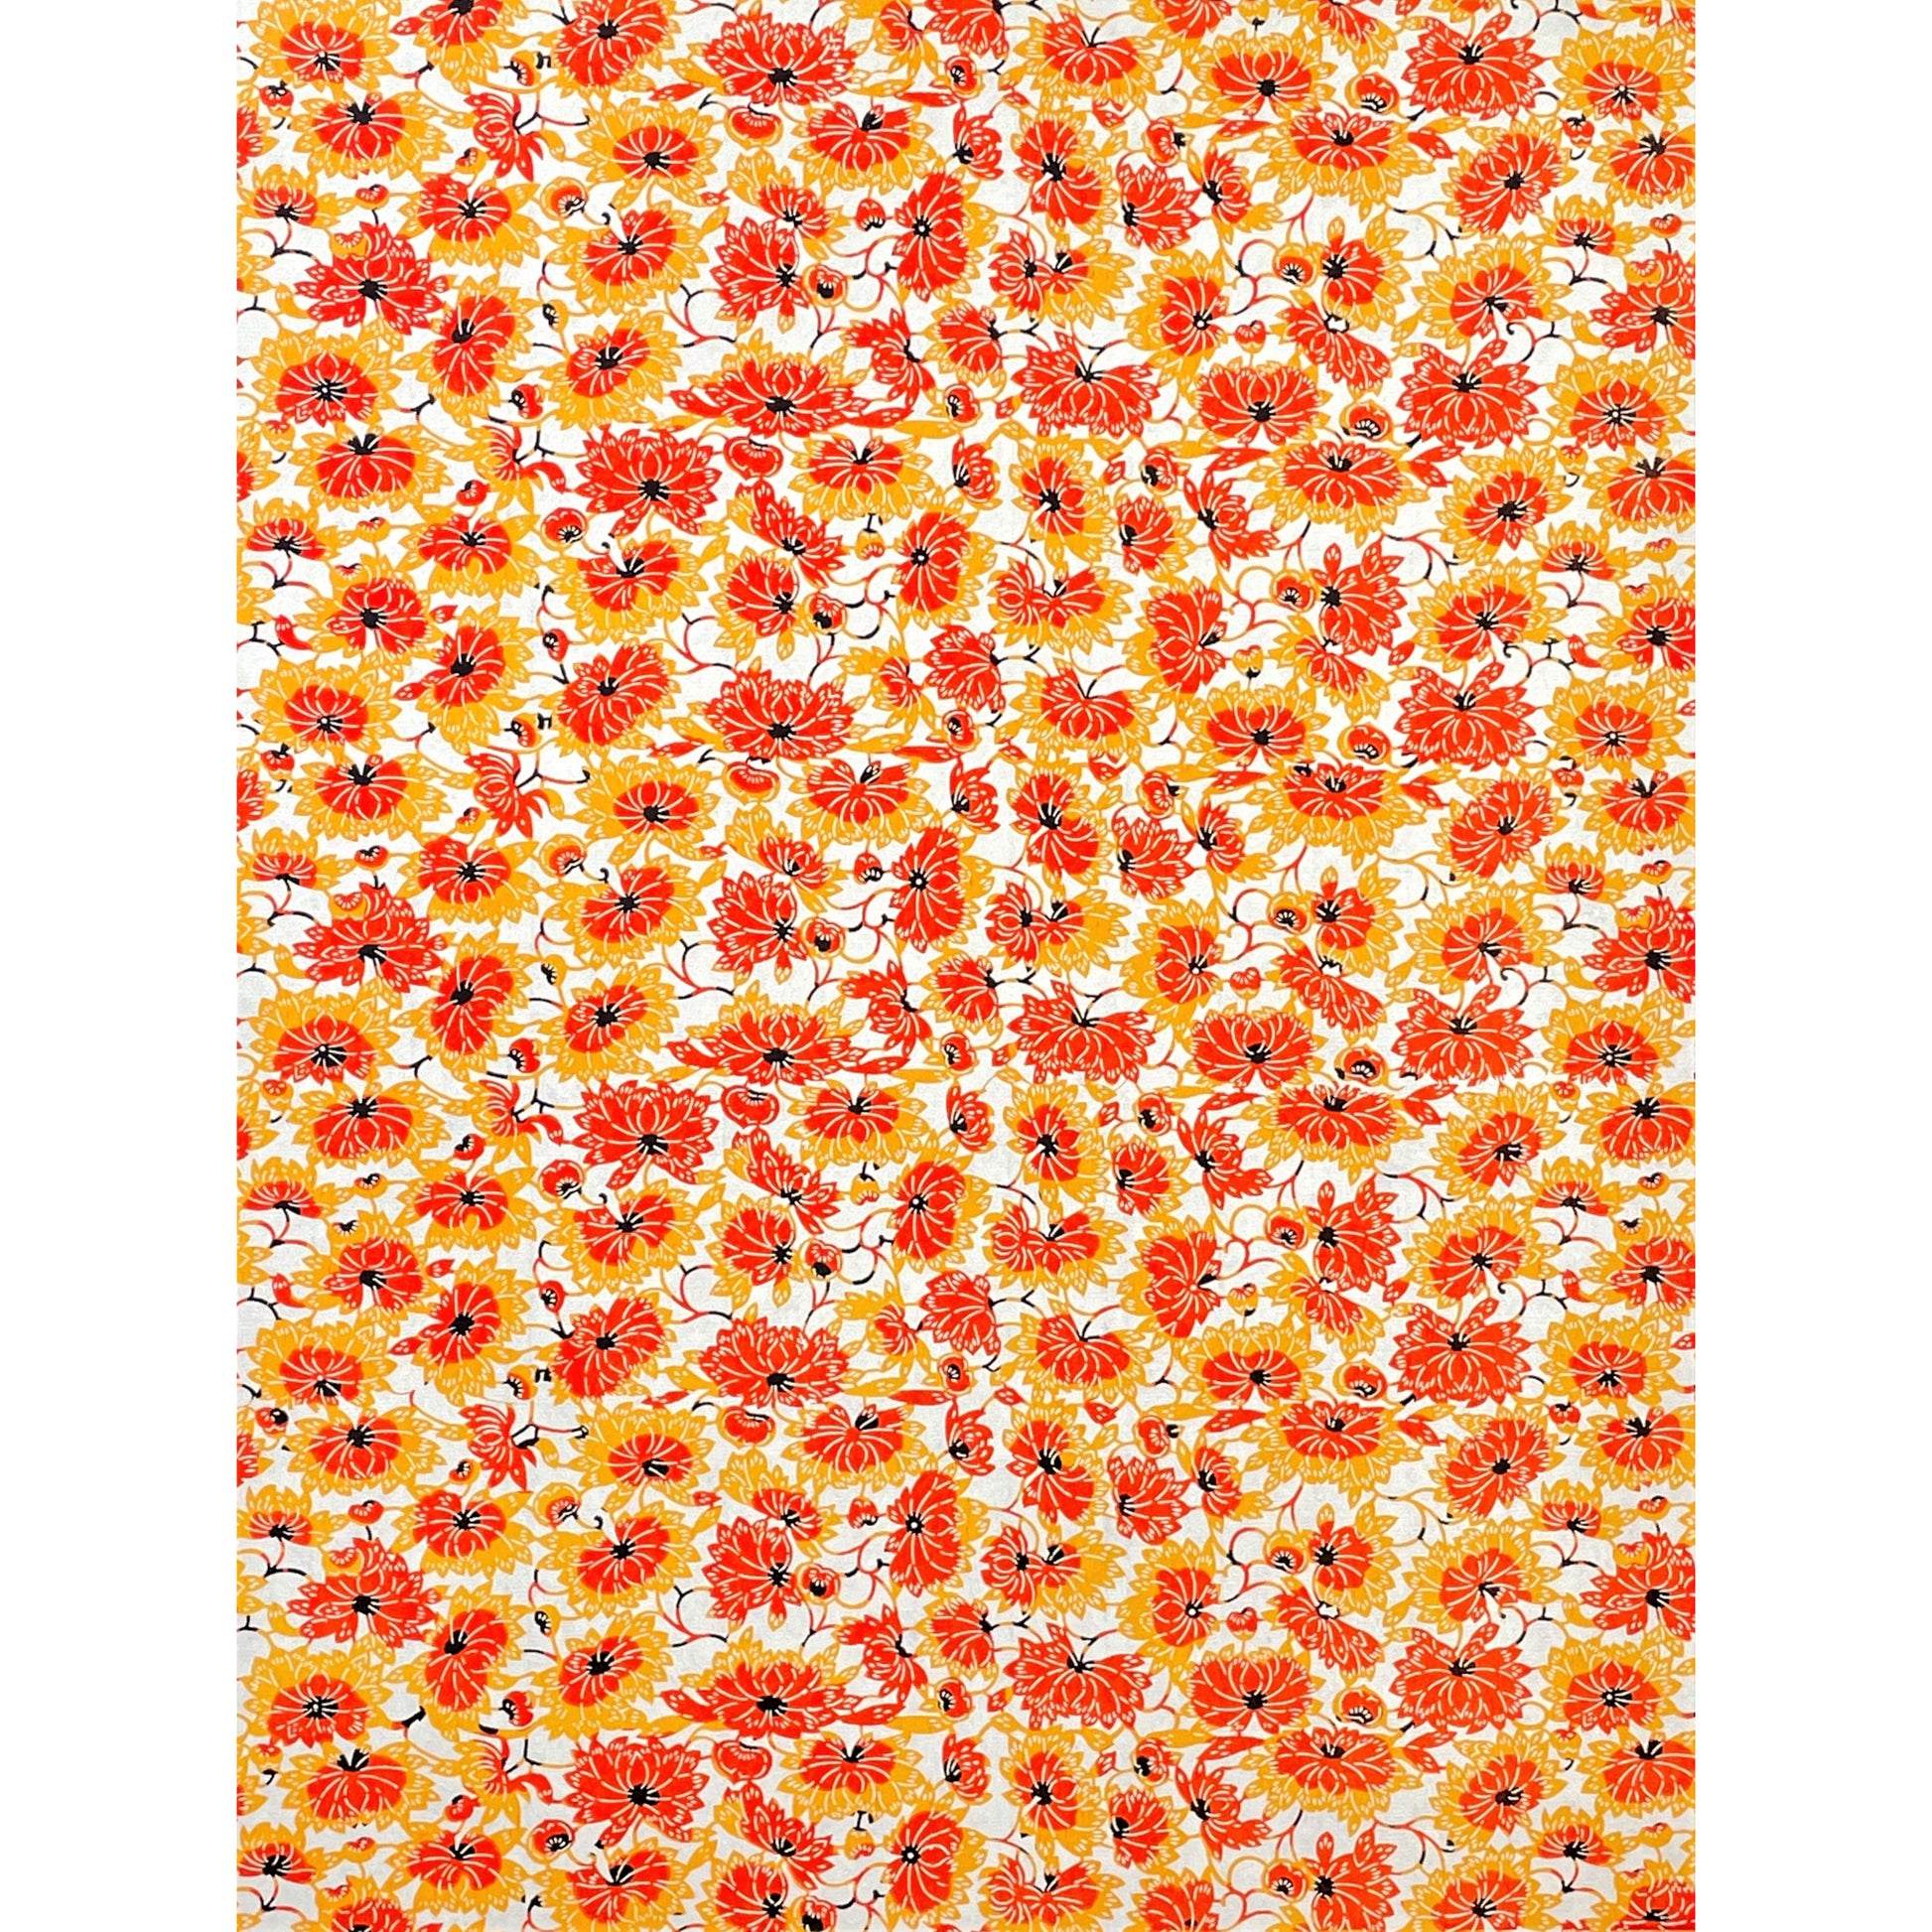 japanese stencil-dyed handmade paper with yellow and orange chrysanthemum repeat pattern, full sheet view